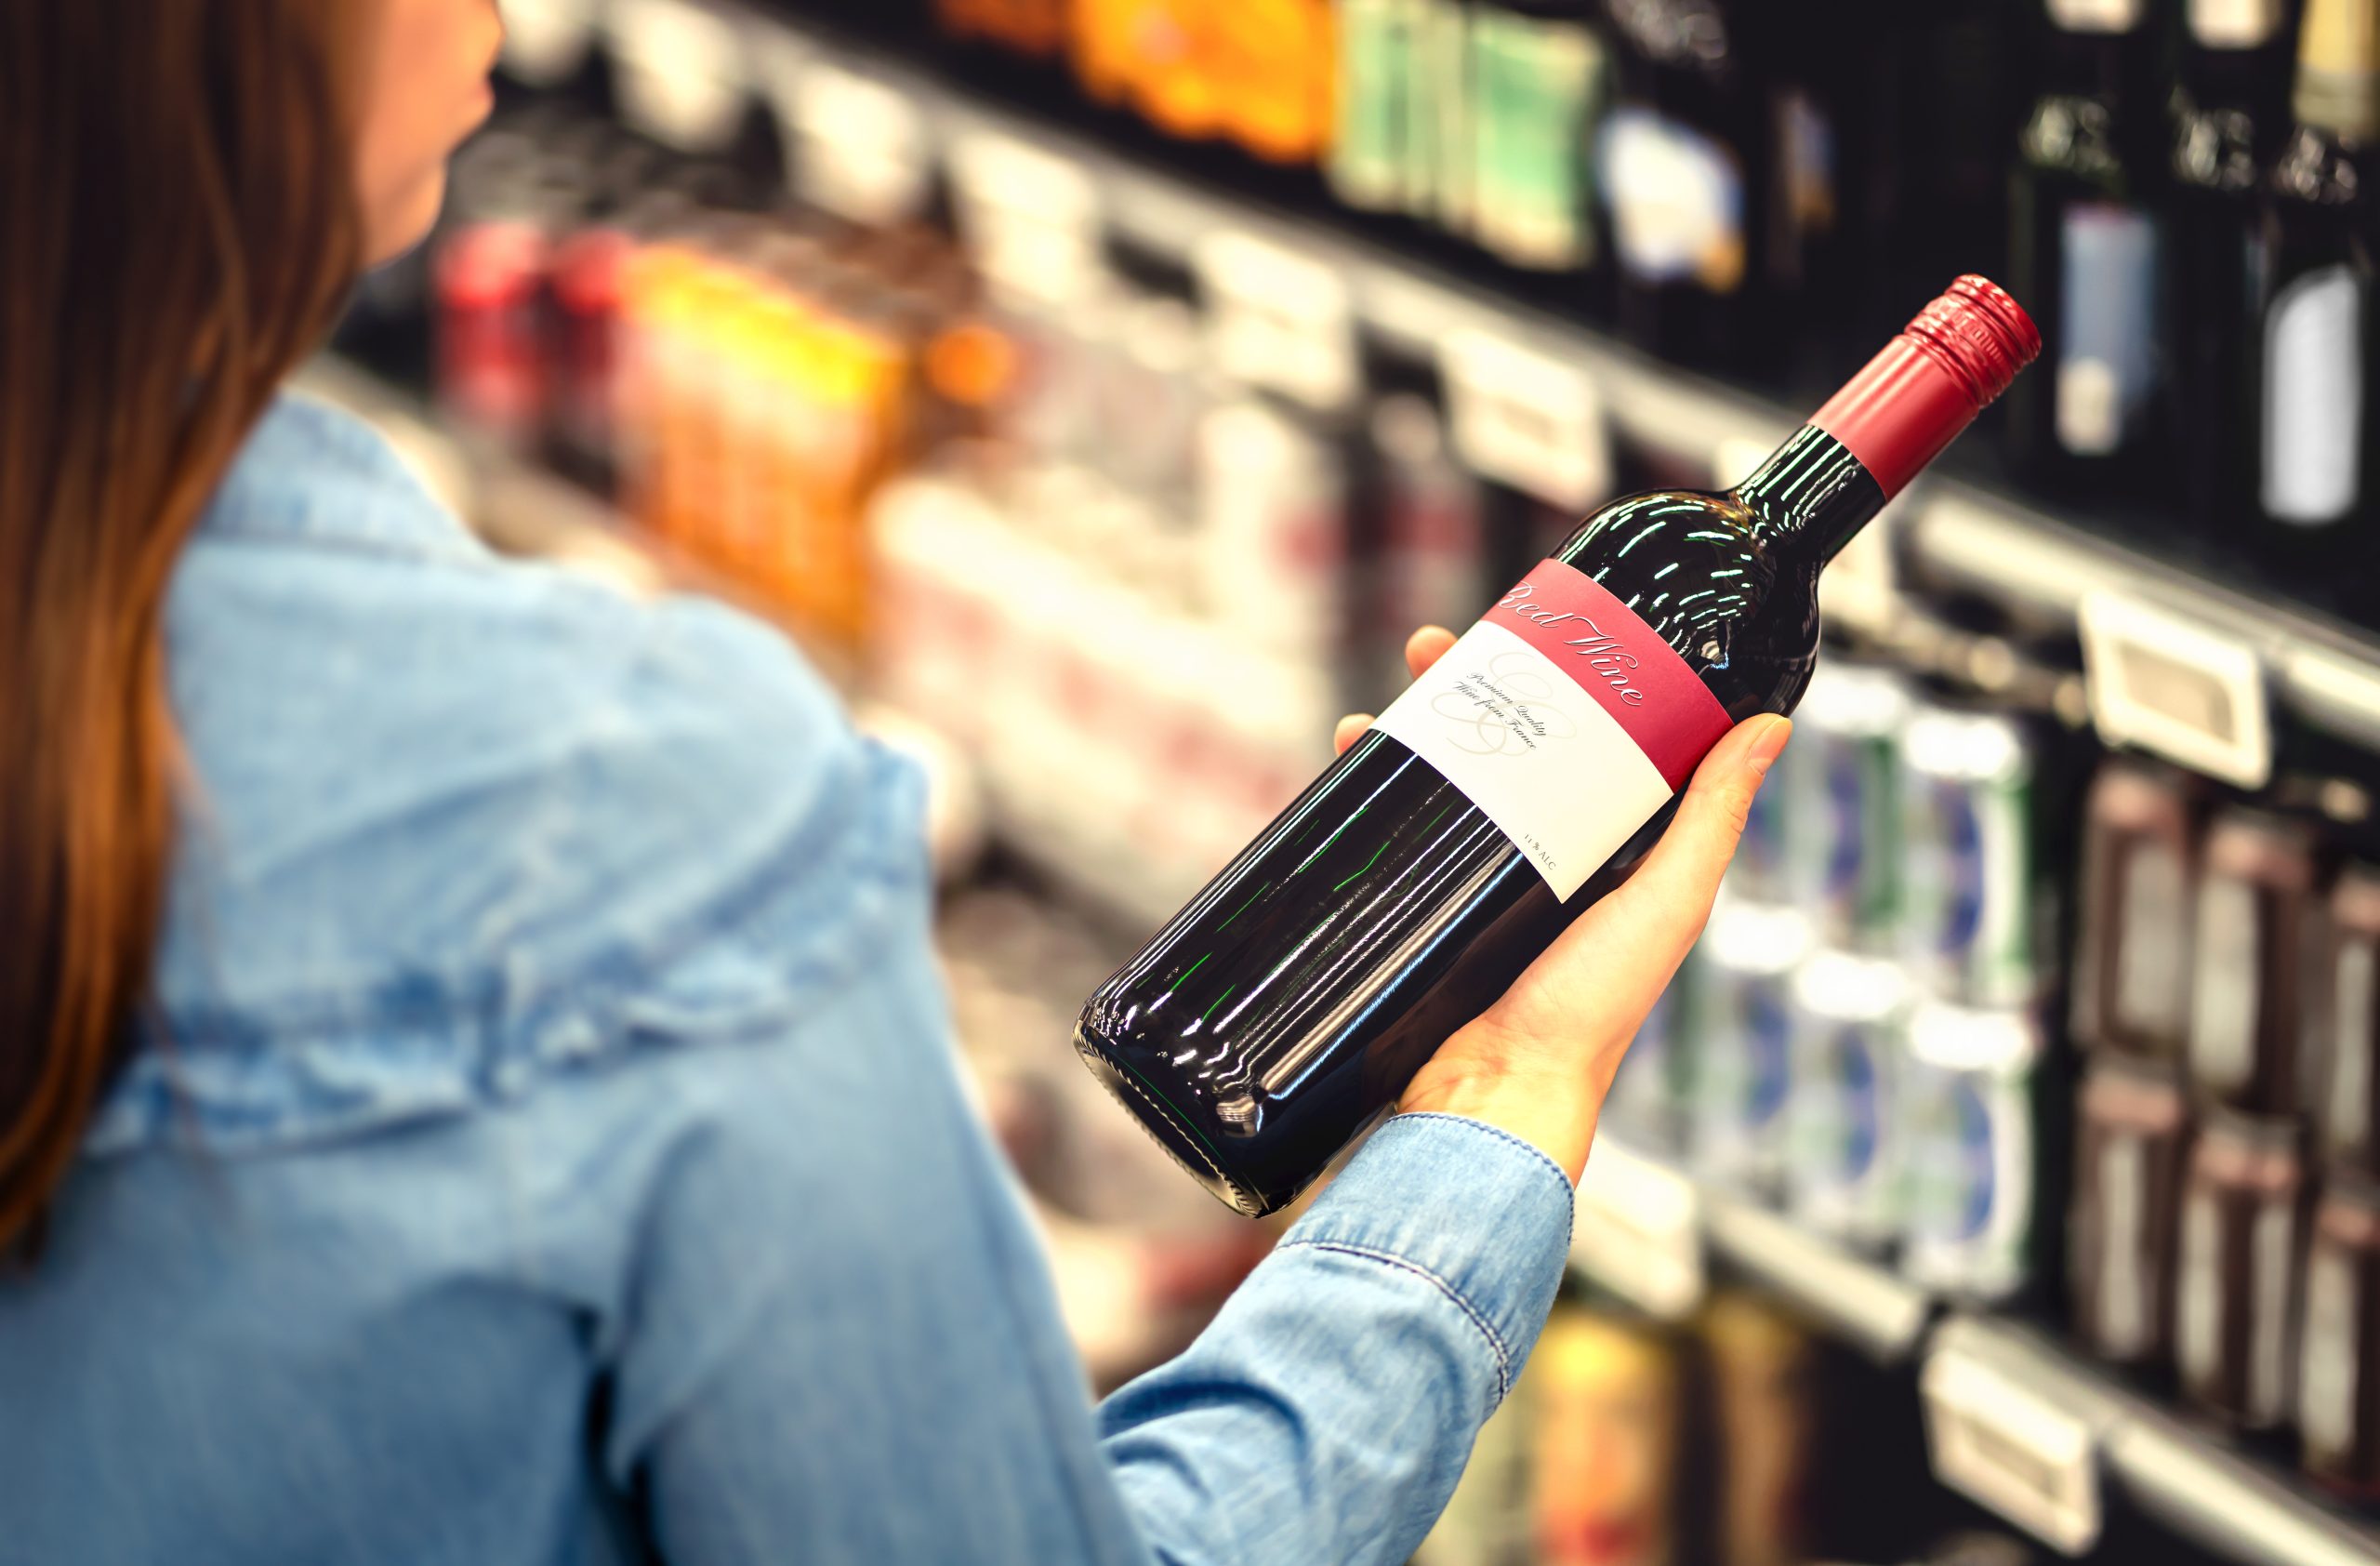 Supermarket loyalty schemes on alcohol sales prohibited under new NI licensing laws